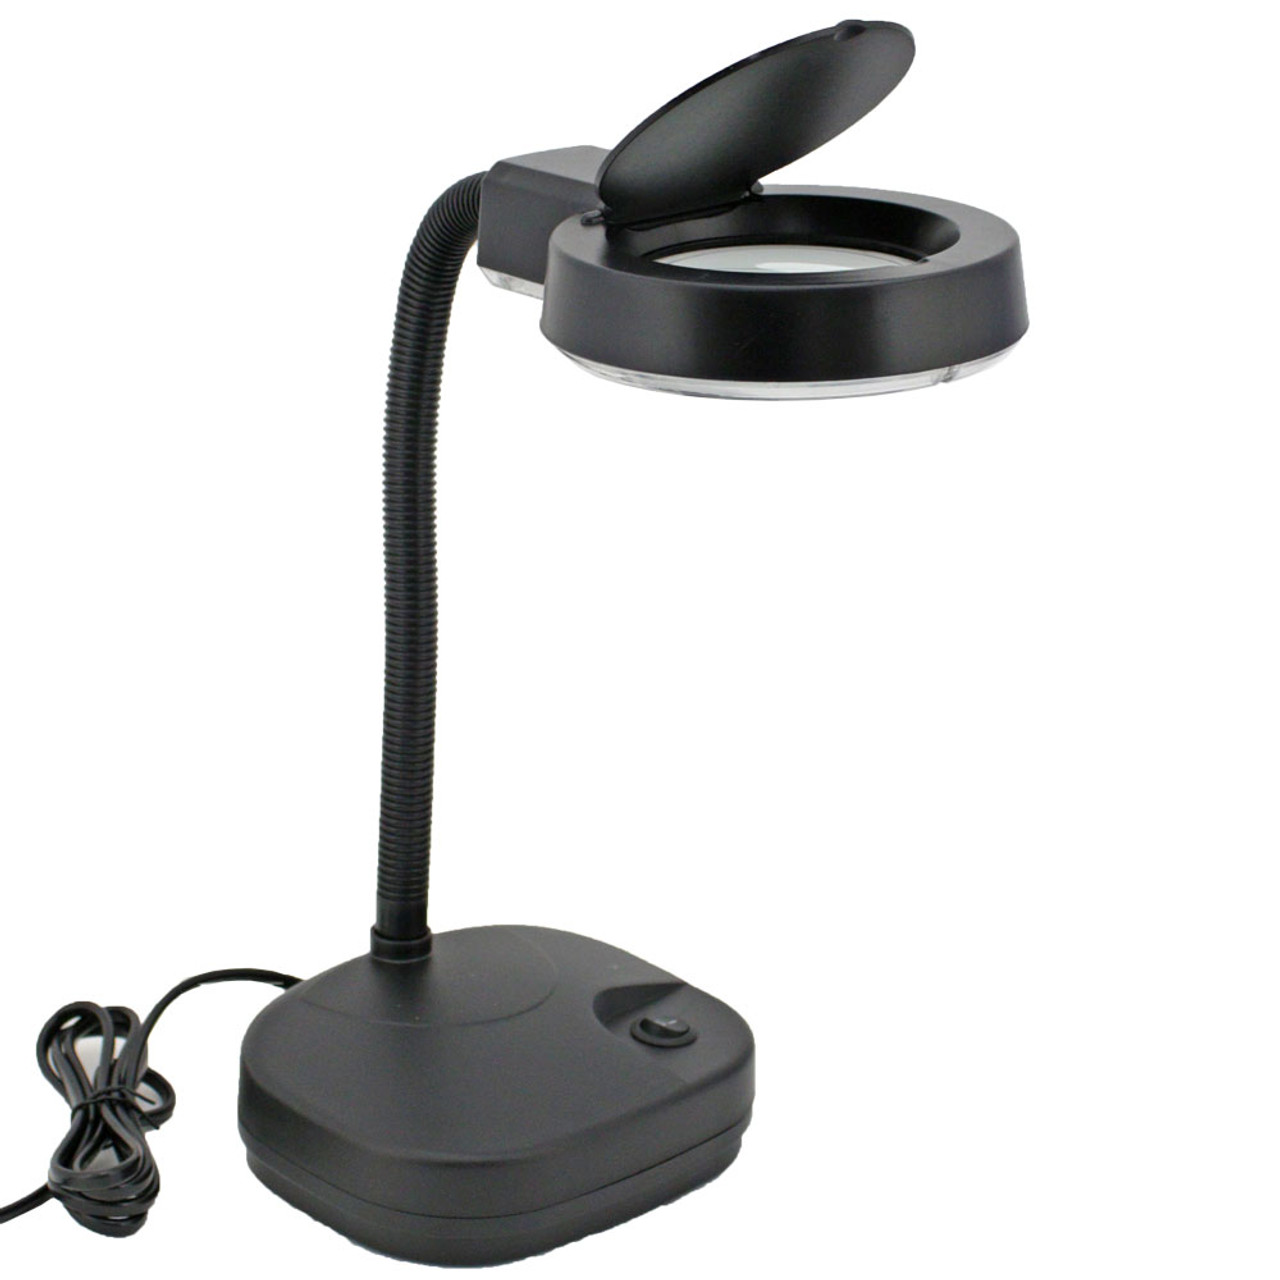 LED Magnifying Lamps and Accessories